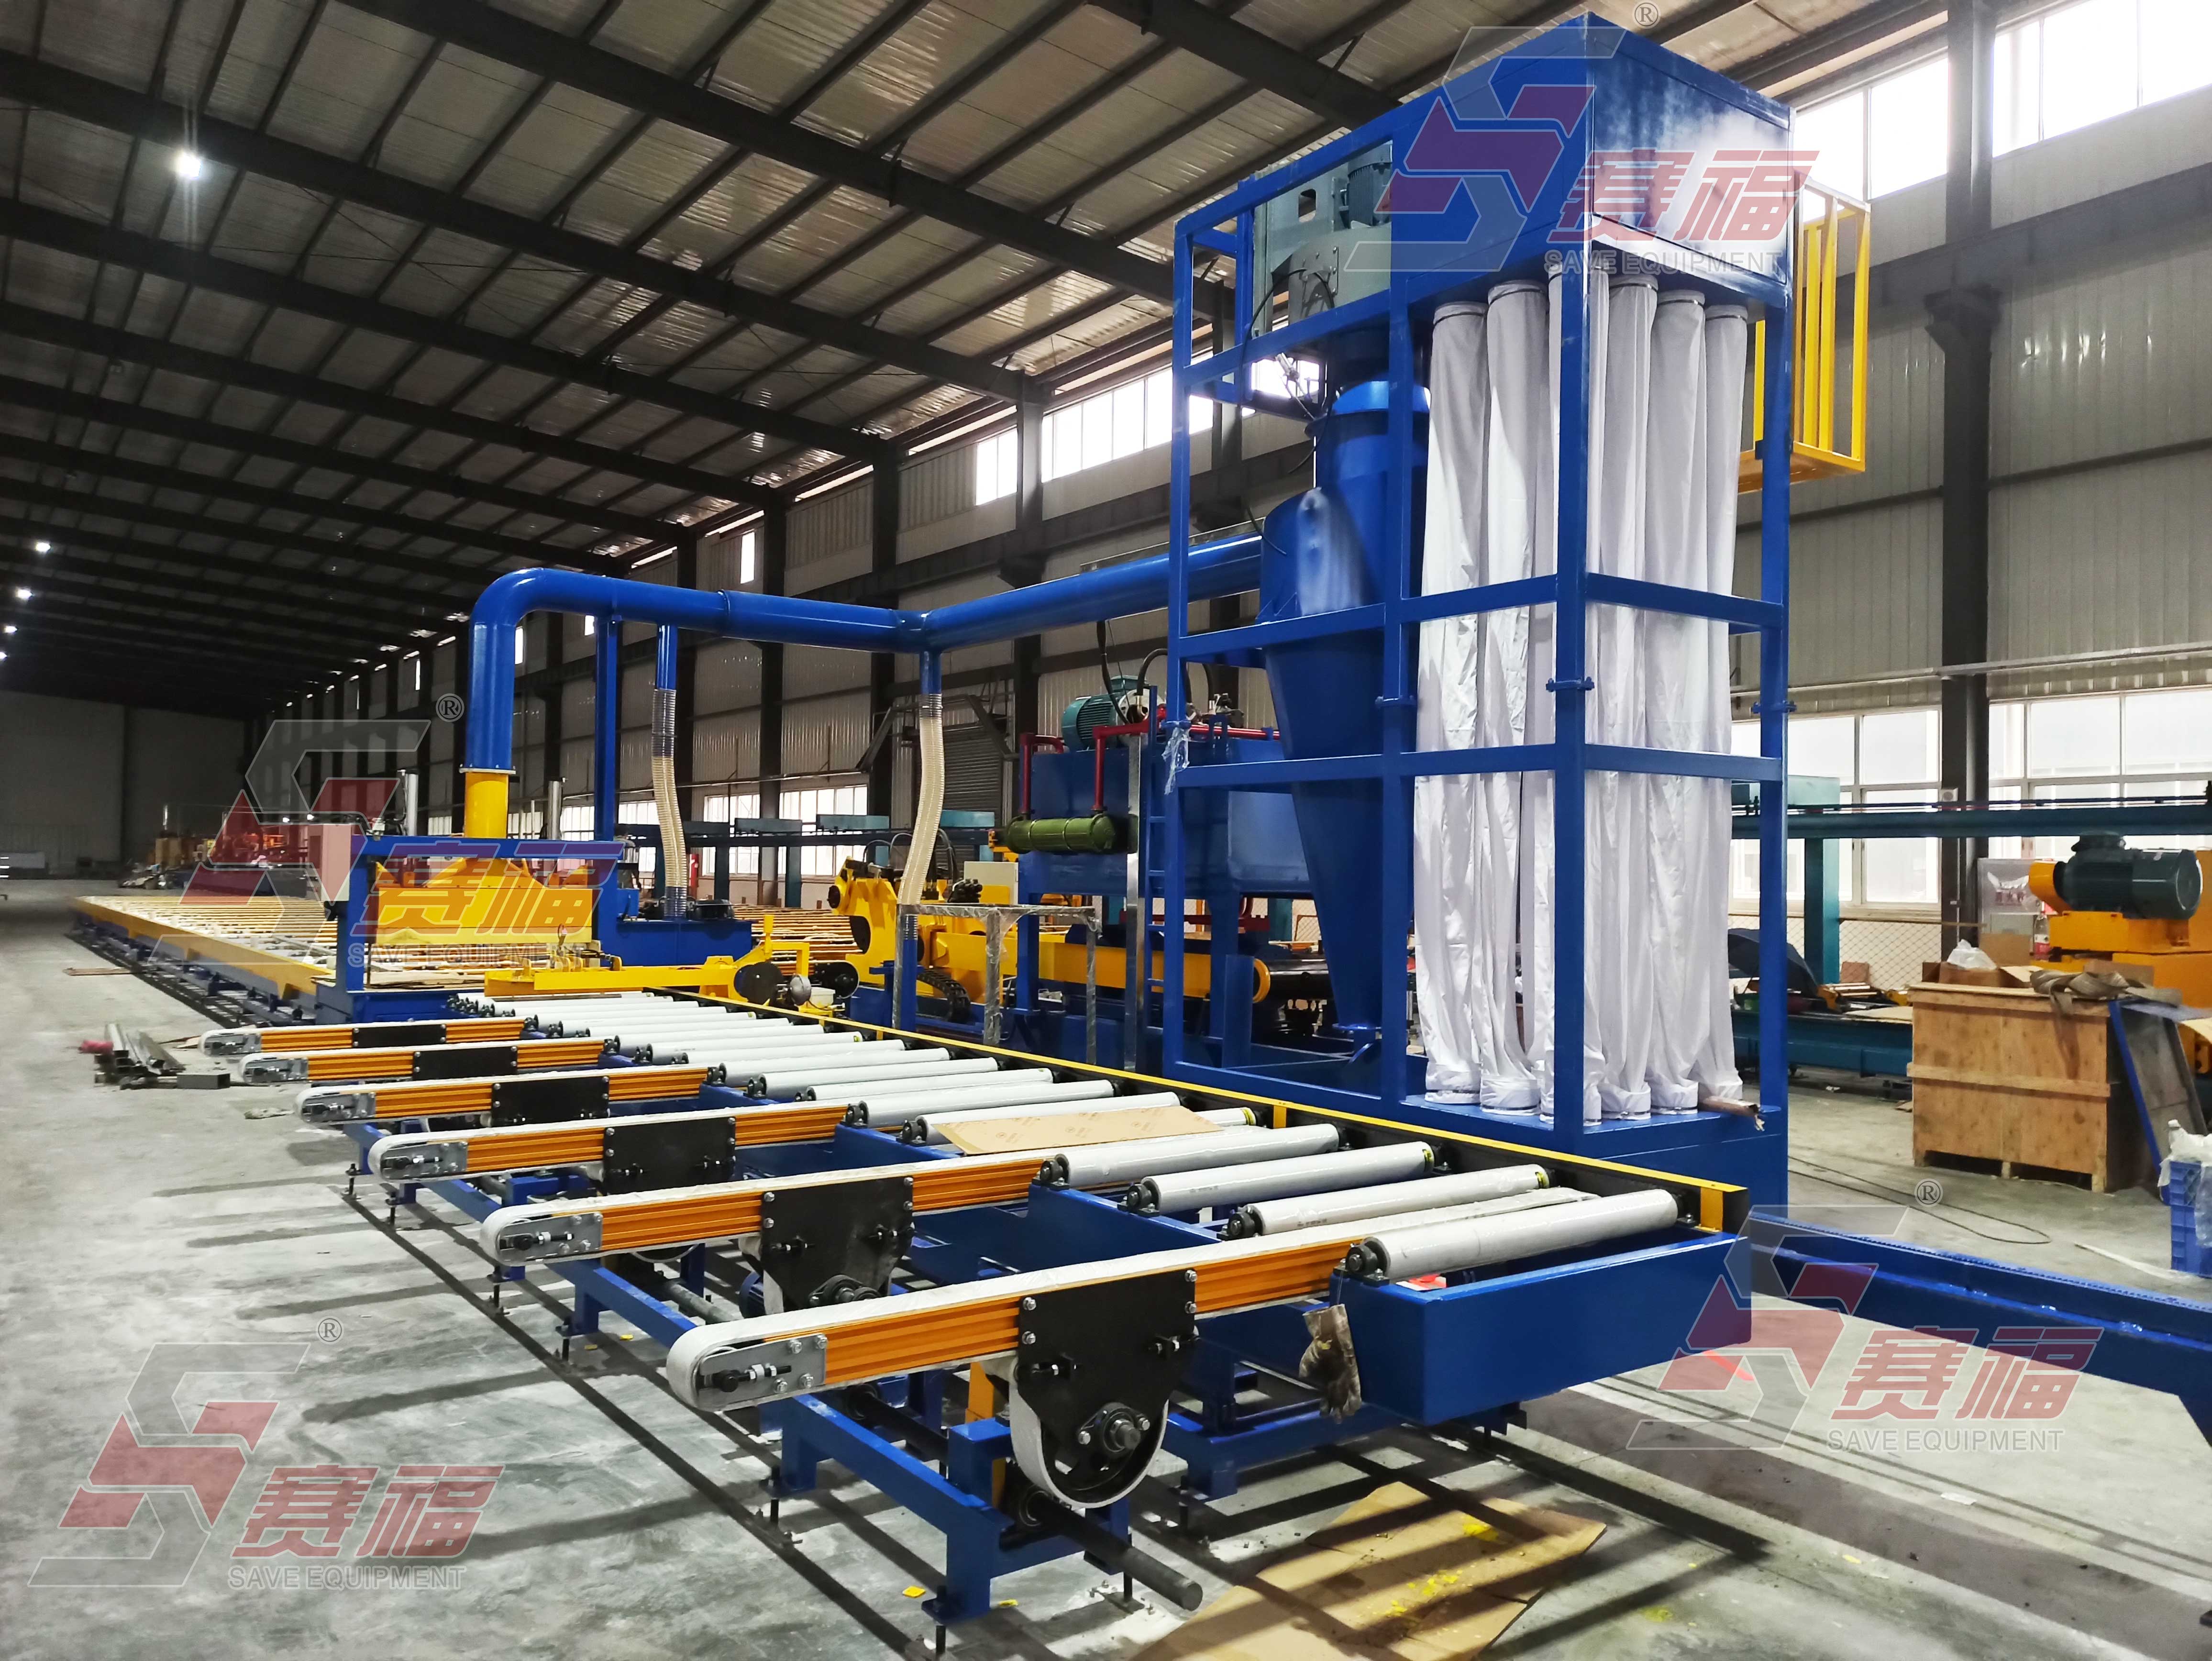 The erection and debugging of handling system for 600T, 800T, 1000T, 1250T, 1500T extrusion line in Henan Fengan Alumini